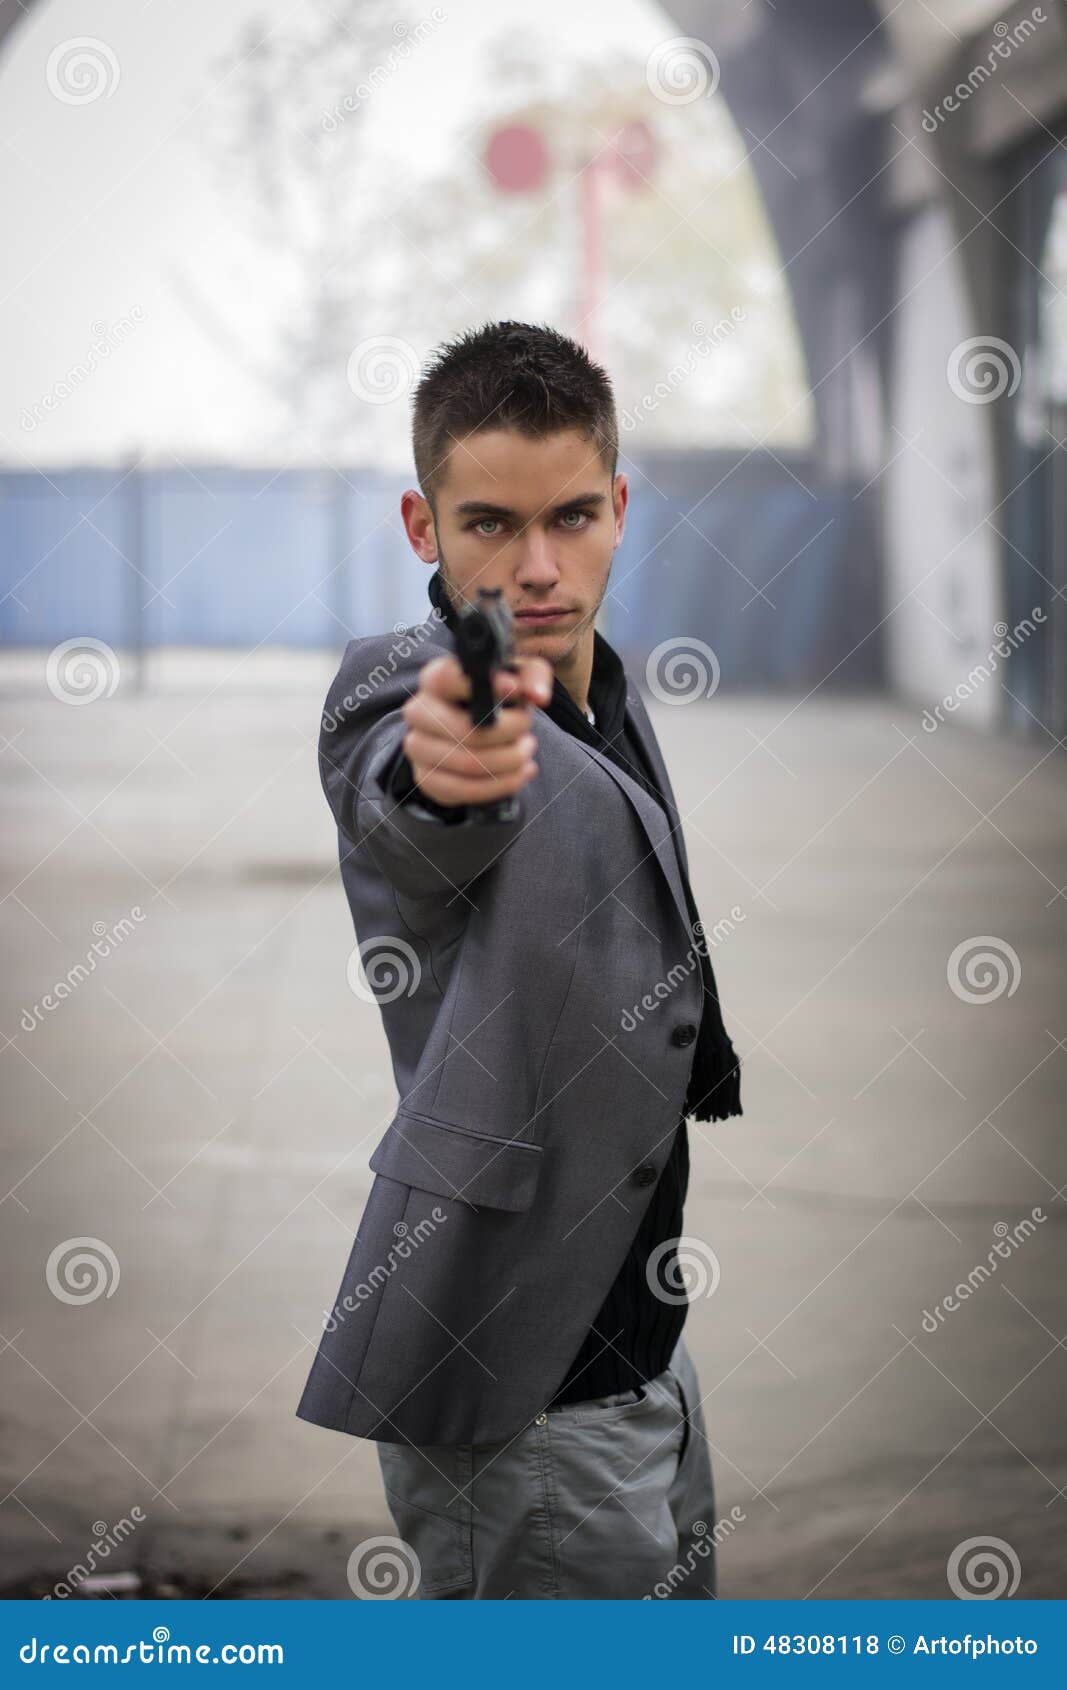 detective or mobster or policeman aiming a firearm